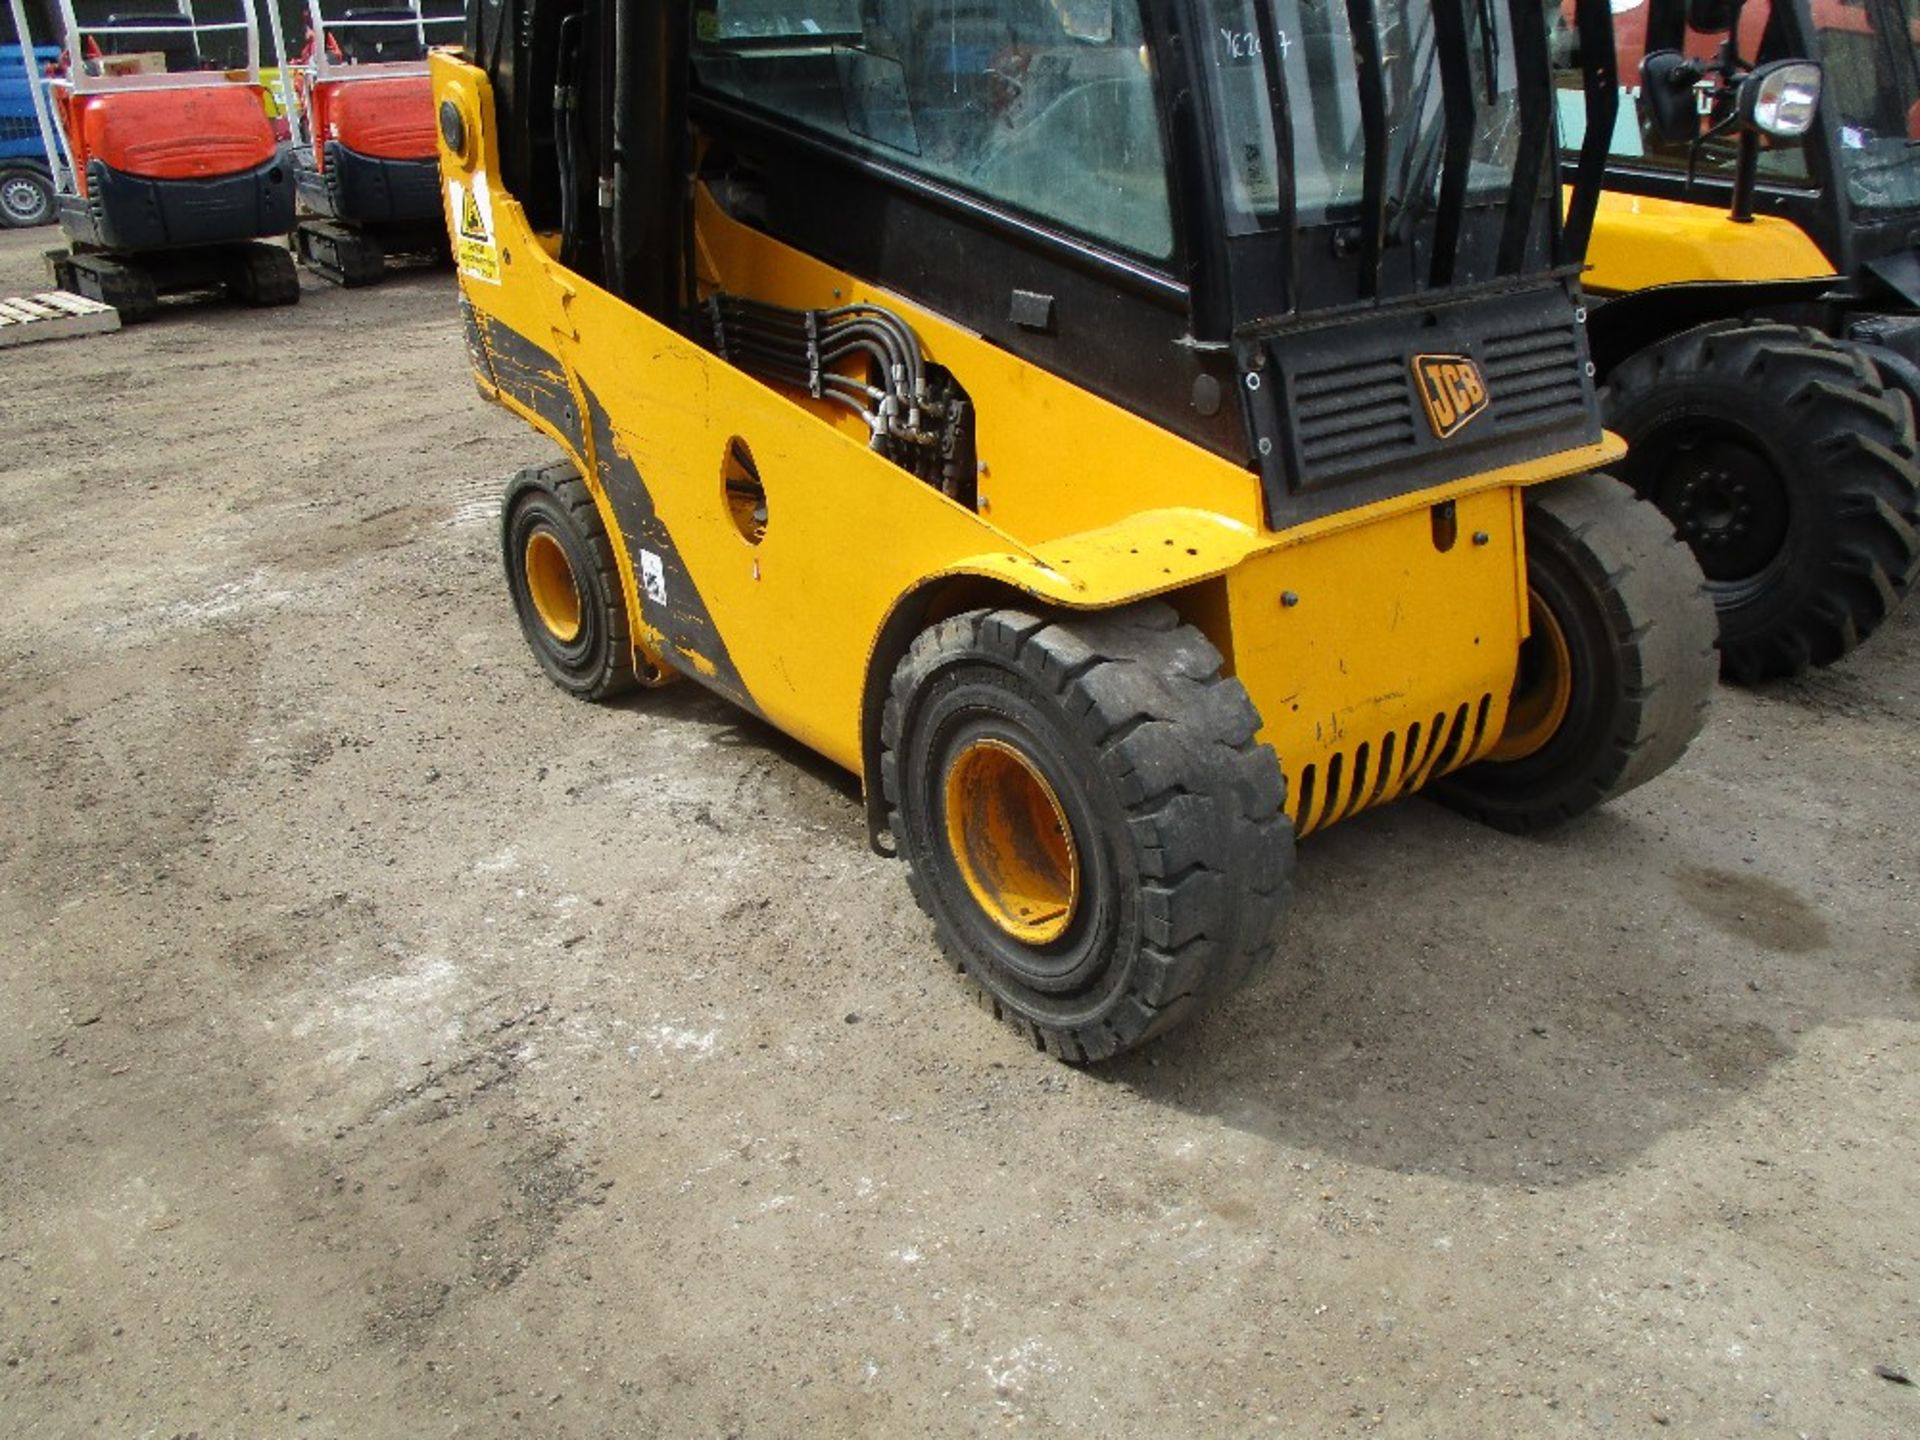 JCB TLT30 TELETRUCK 2WD YEAR 2007 SN:972569N 8291 REC HRS WHEN TESTED WAS SEEN TO DRIVE, STEER, LIFT - Image 4 of 6